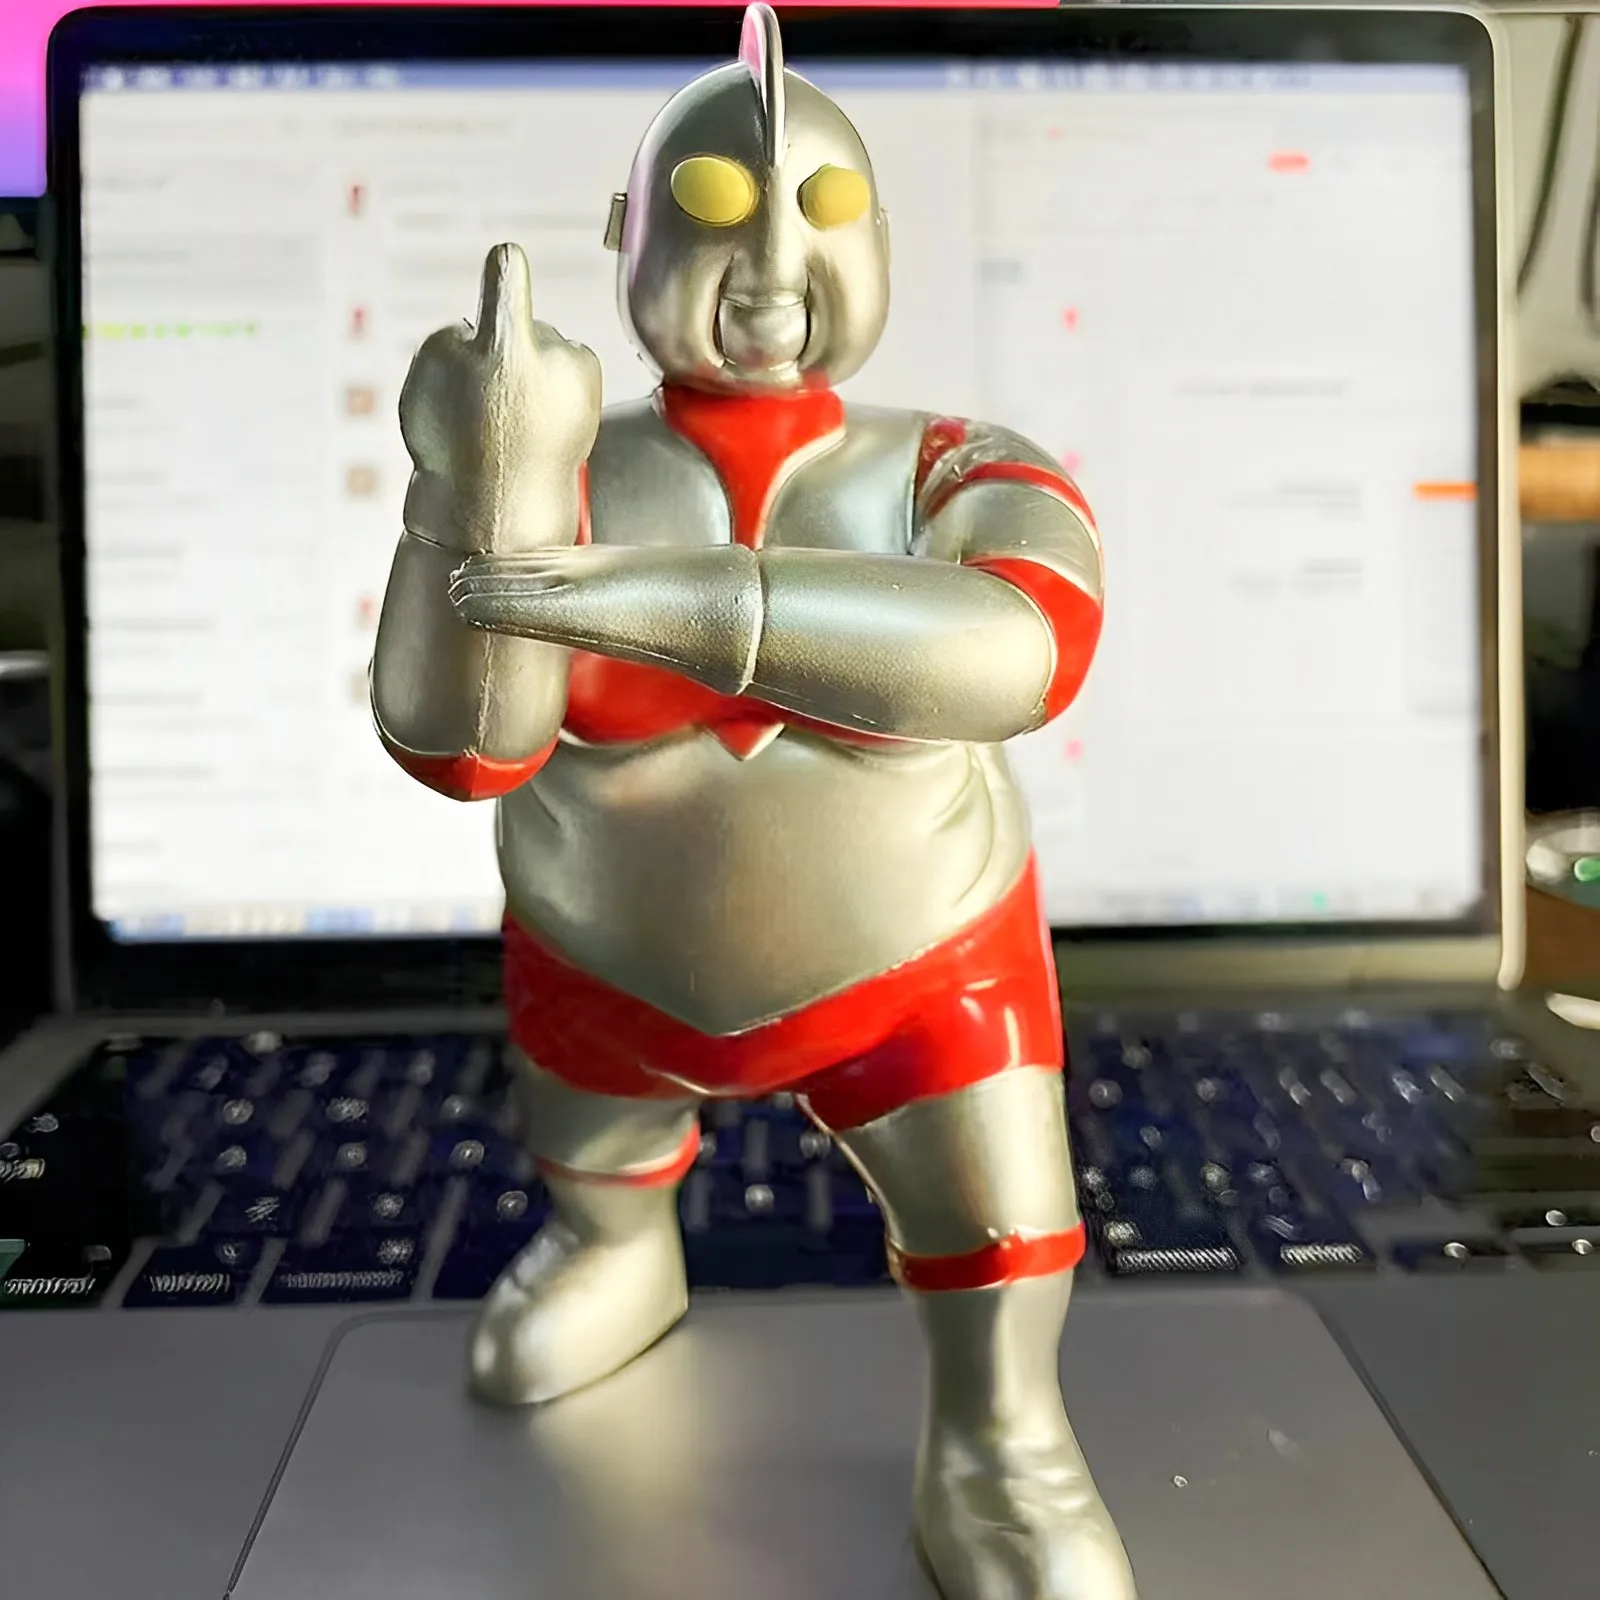 

2023 New Ultraman Fat Man Anime Peripheral Gk Obesity Kawaii Collections Pvc Decorate Model Toy Kid Children Birthday Cute Gifts